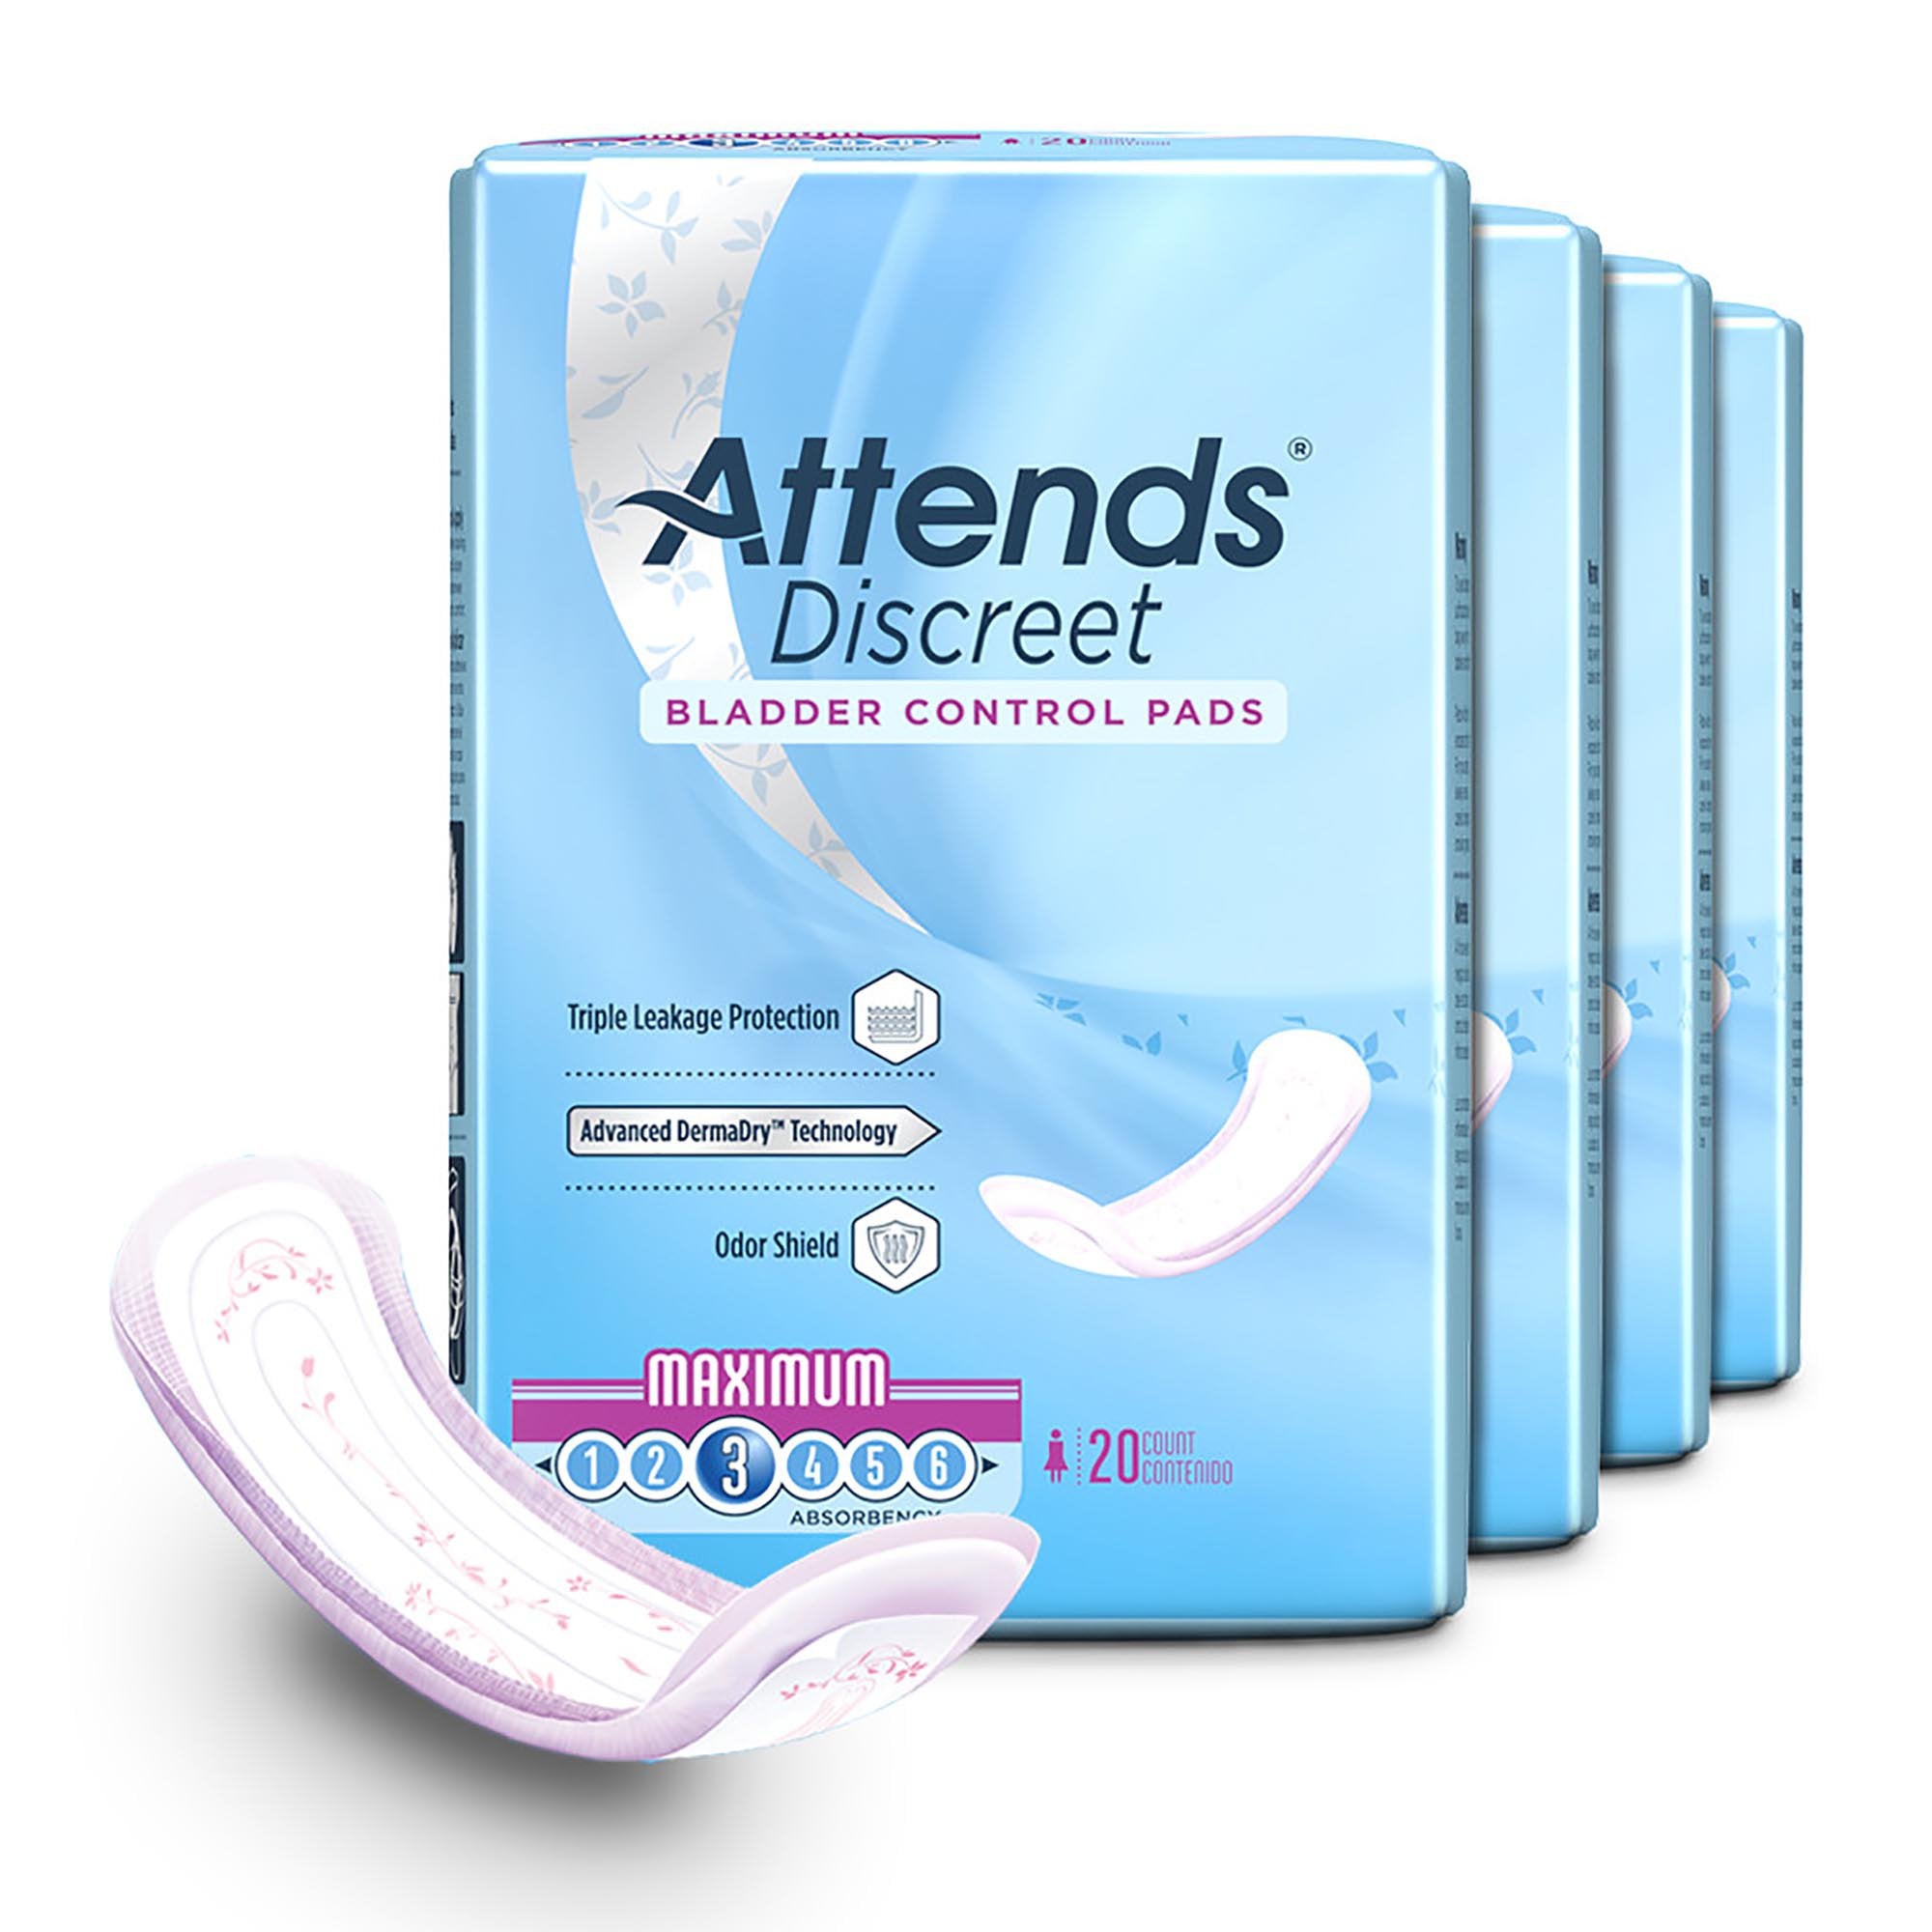 Bladder Control Pad Attends® Discreet Maximum 13 Inch Length Heavy Absorbency Polymer Core One Size Fits Most